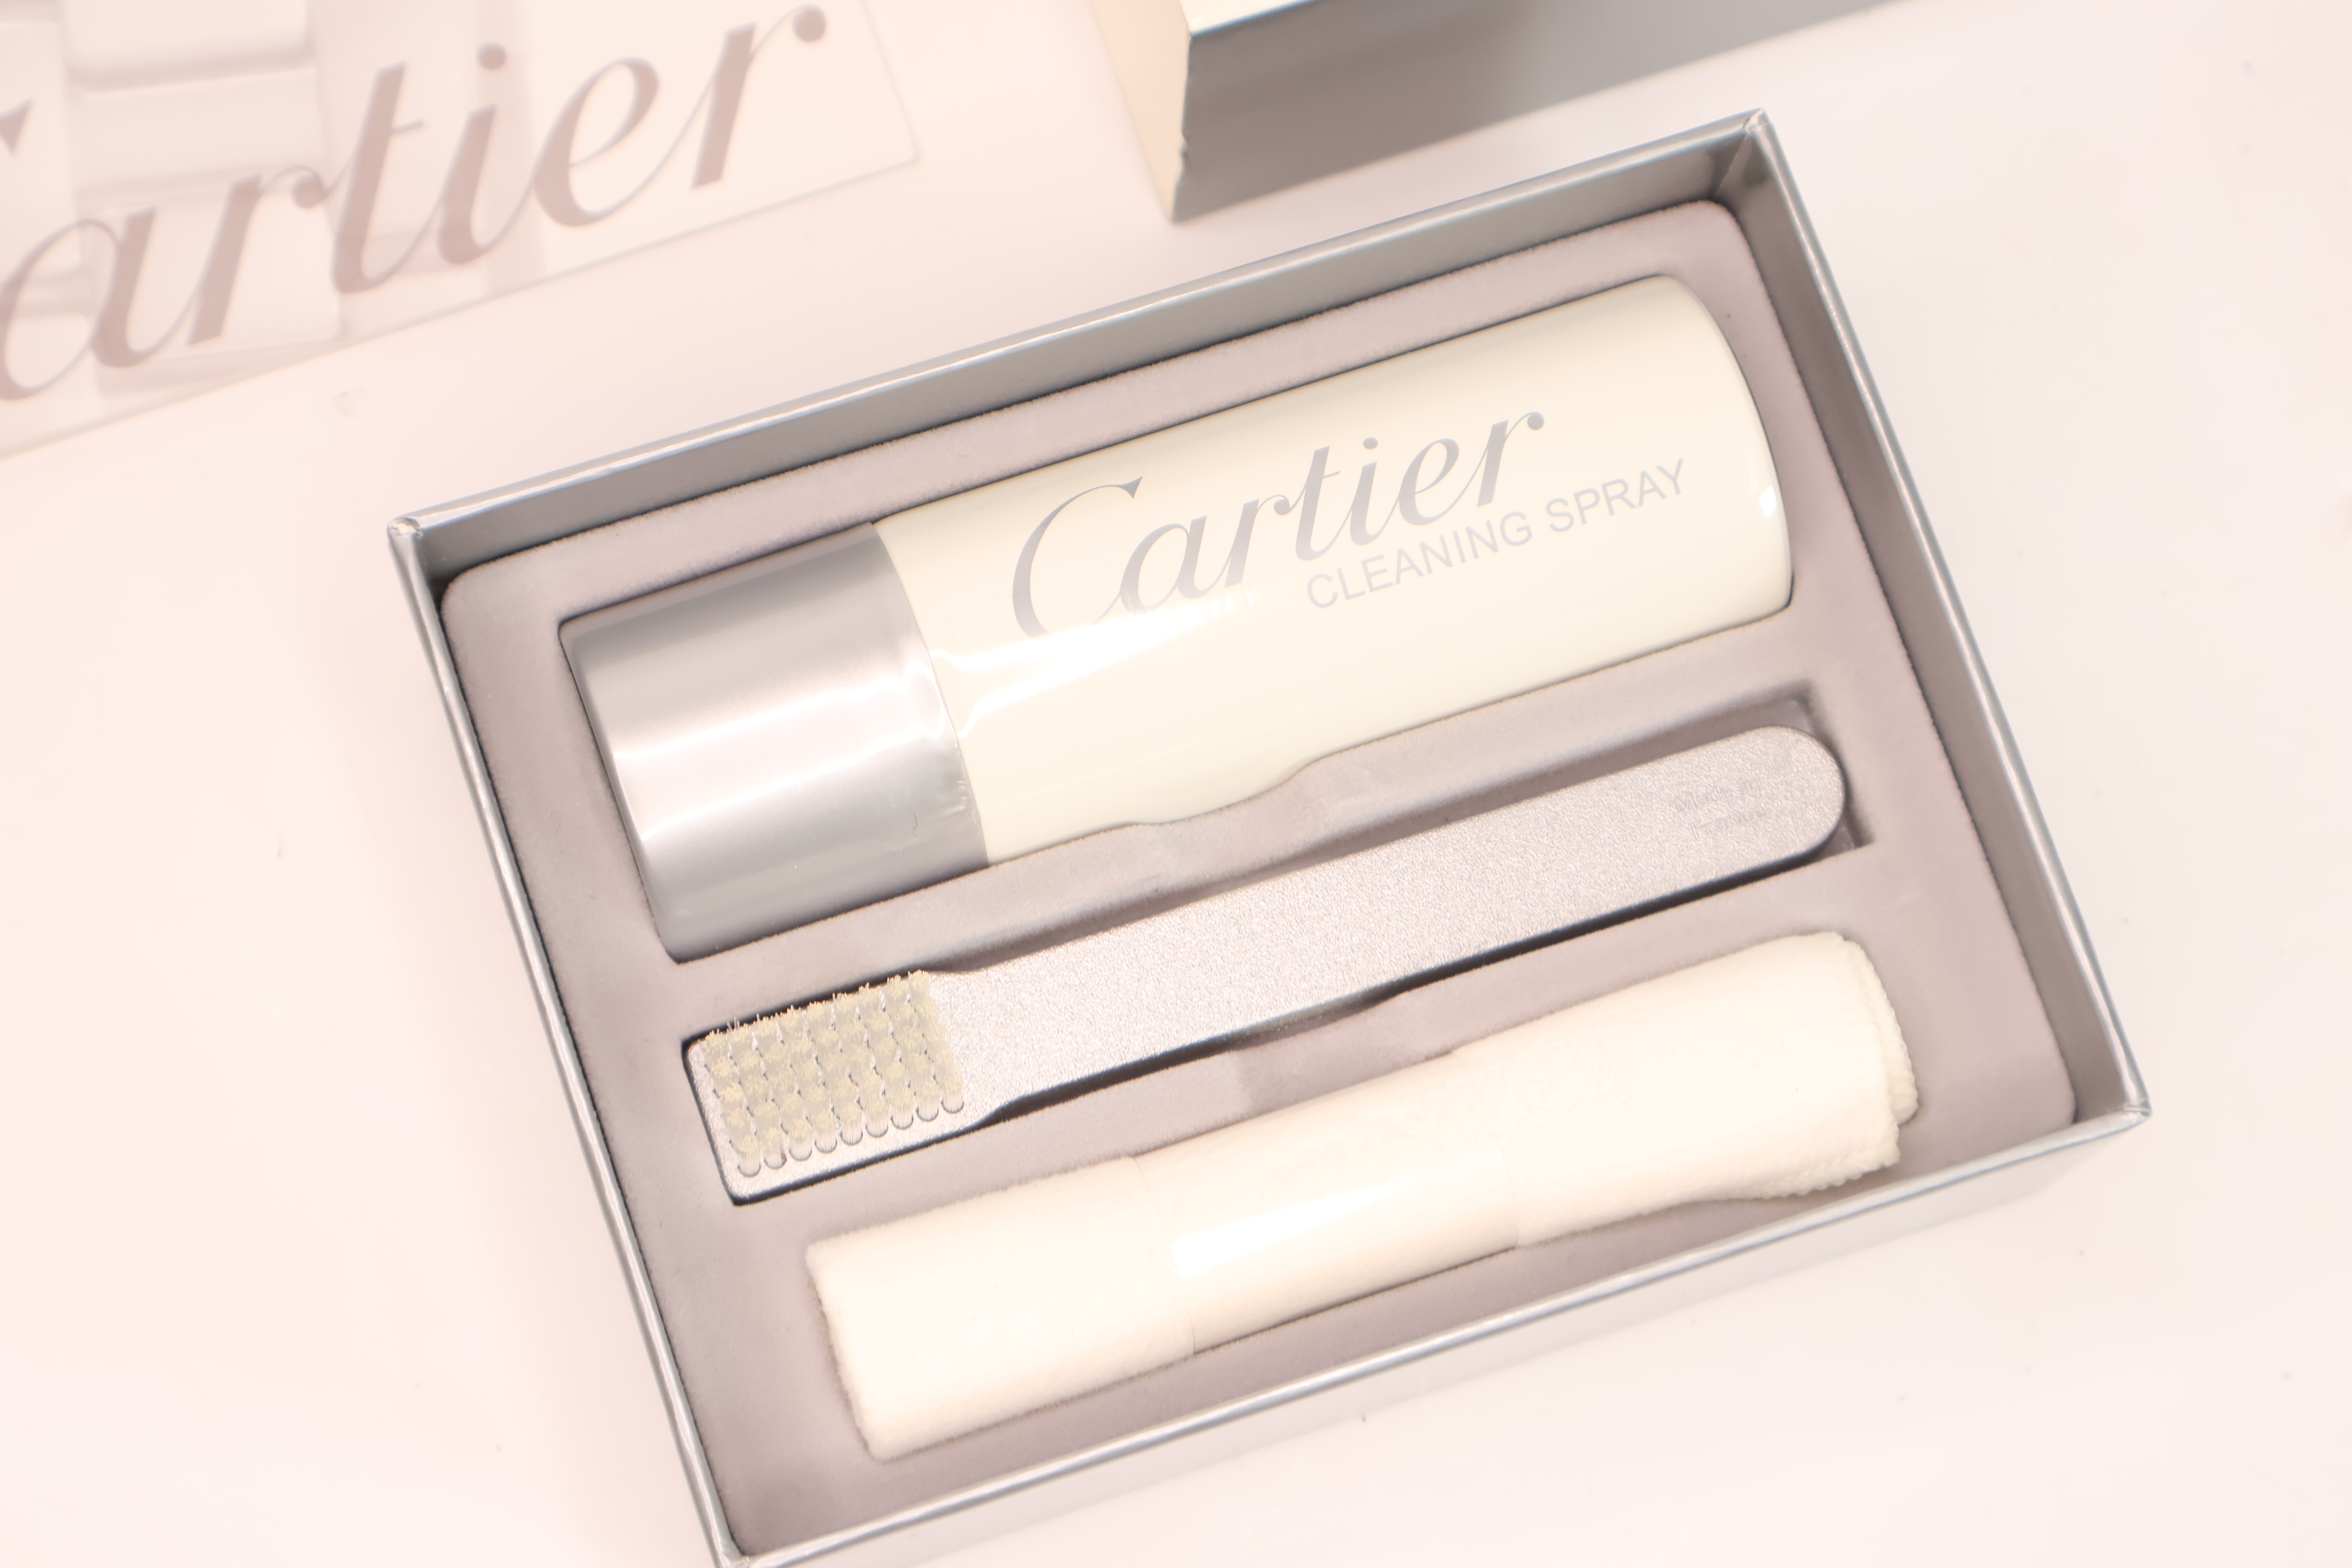 *To Be Sold Without Reserve* Cartier Cleaning Kit - Image 2 of 2